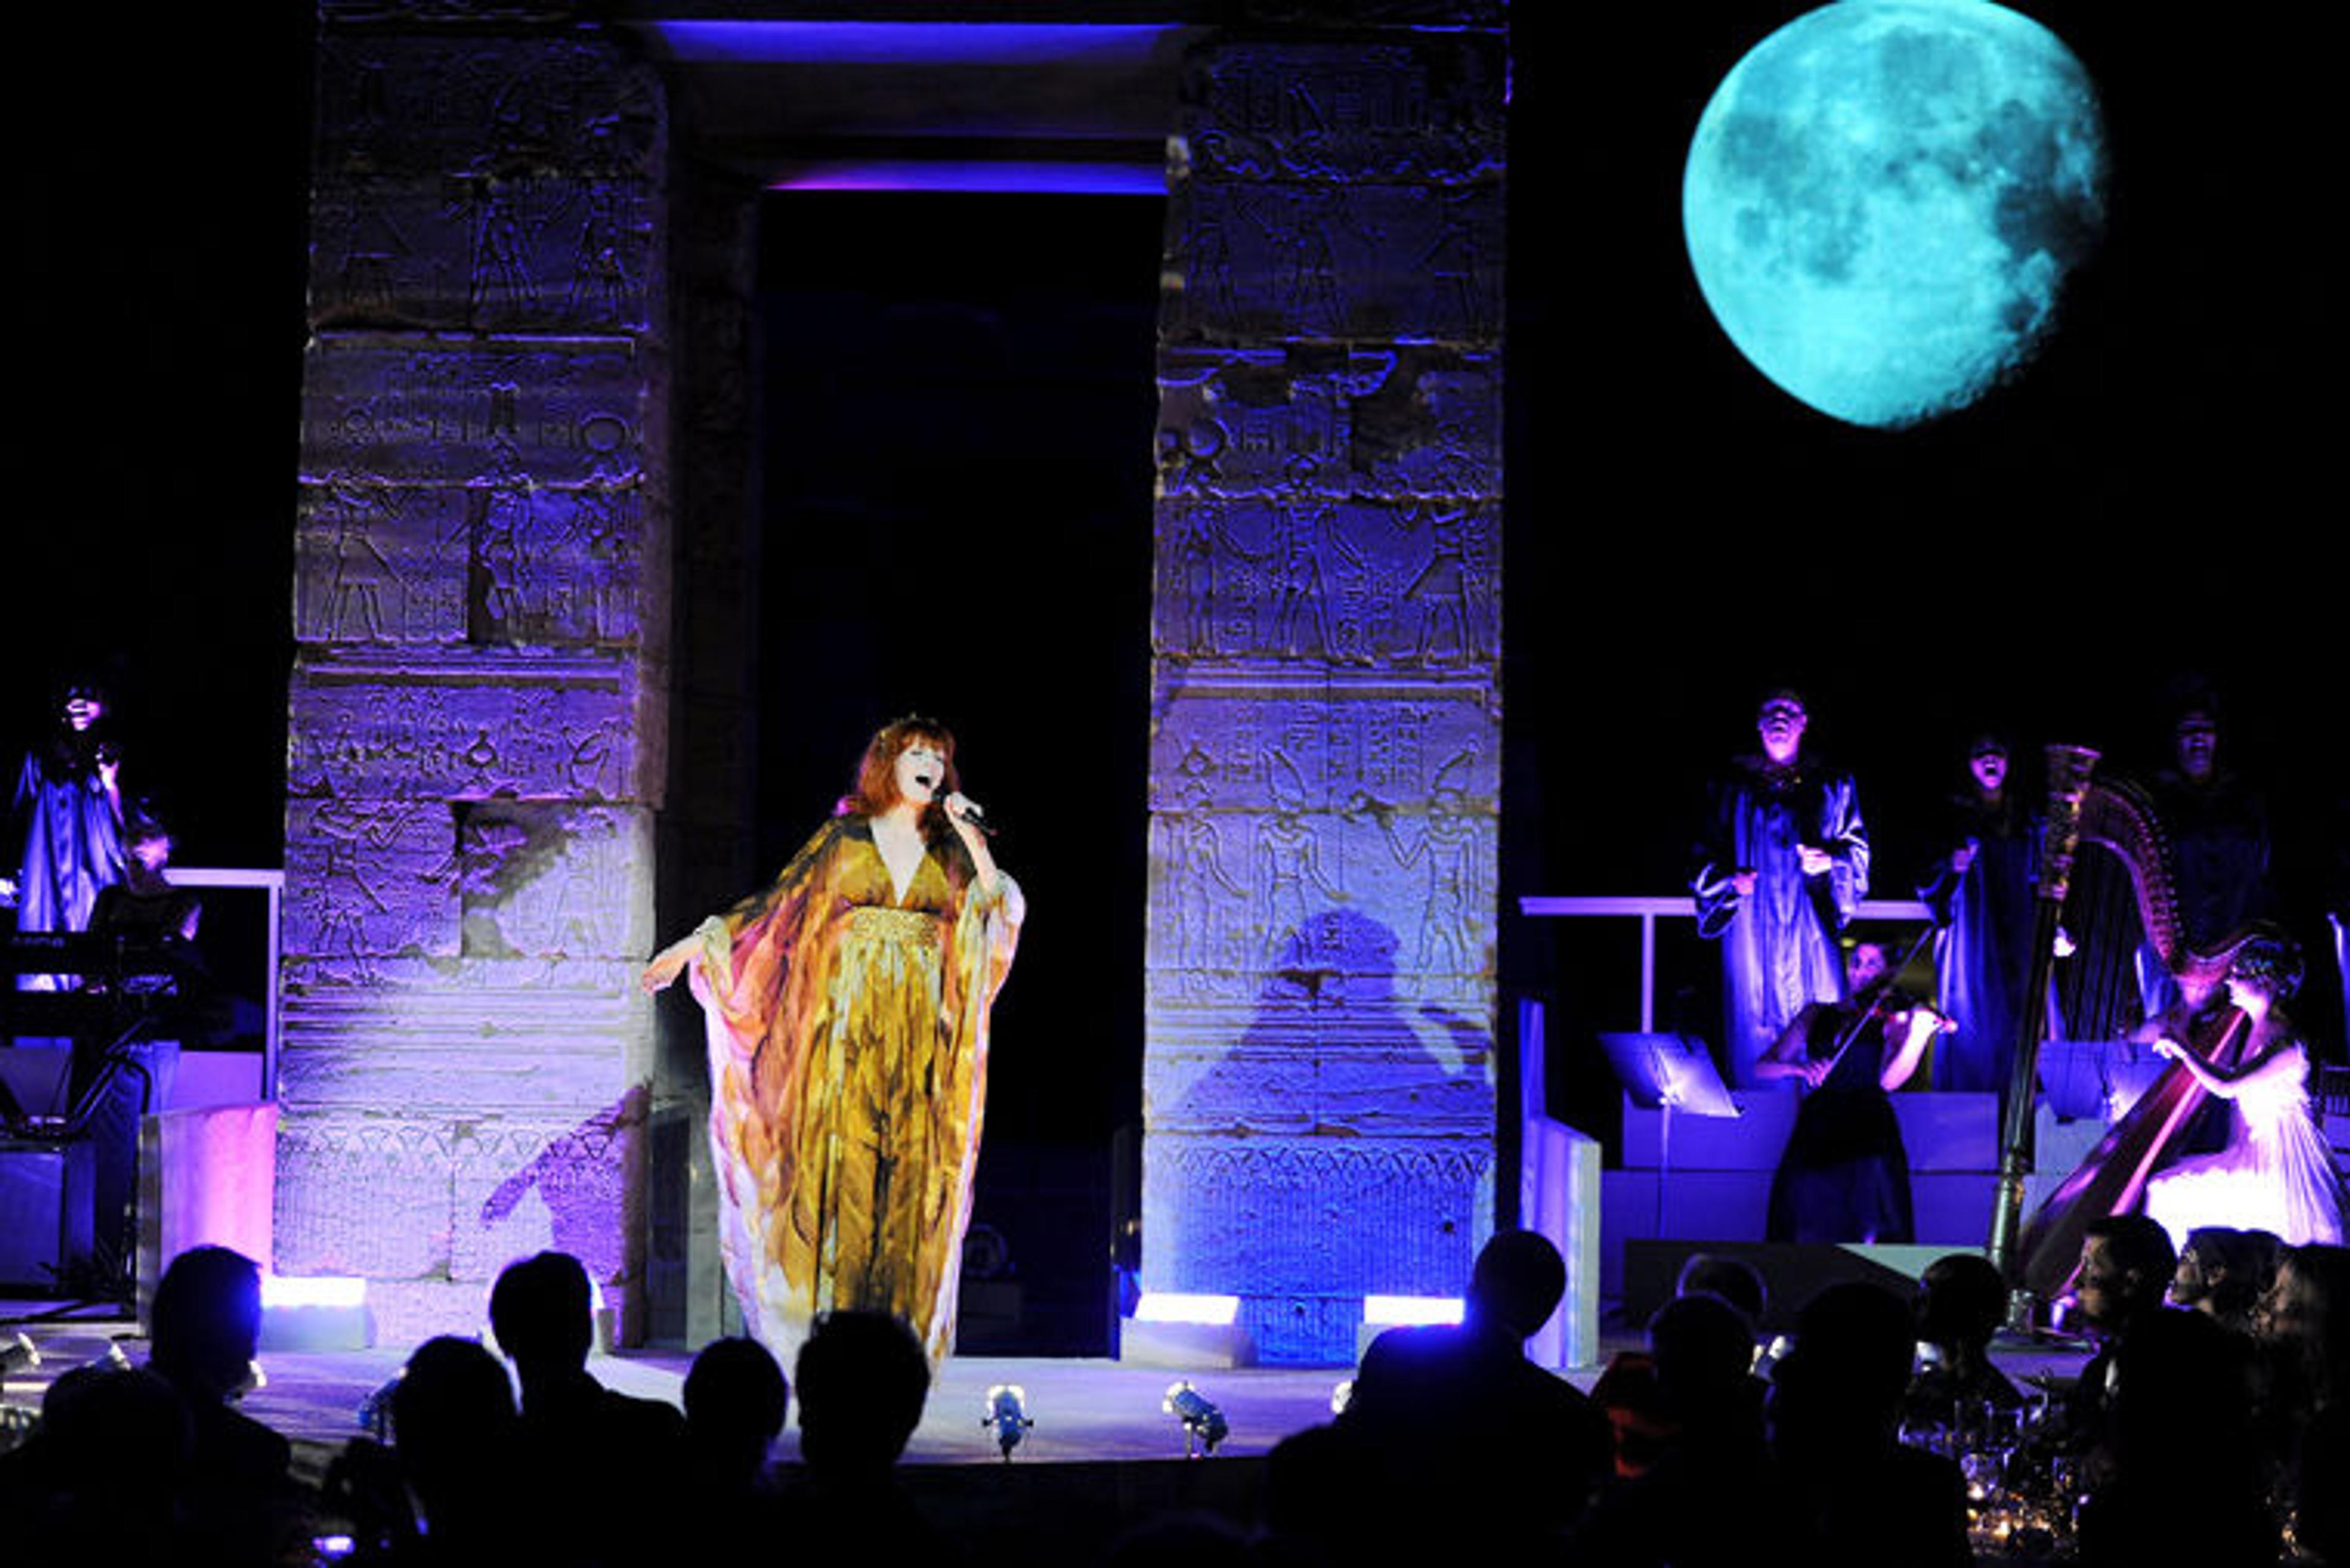 Florence and the Machine perform in front of the Temple of Dendur at the 2011 Met Gala